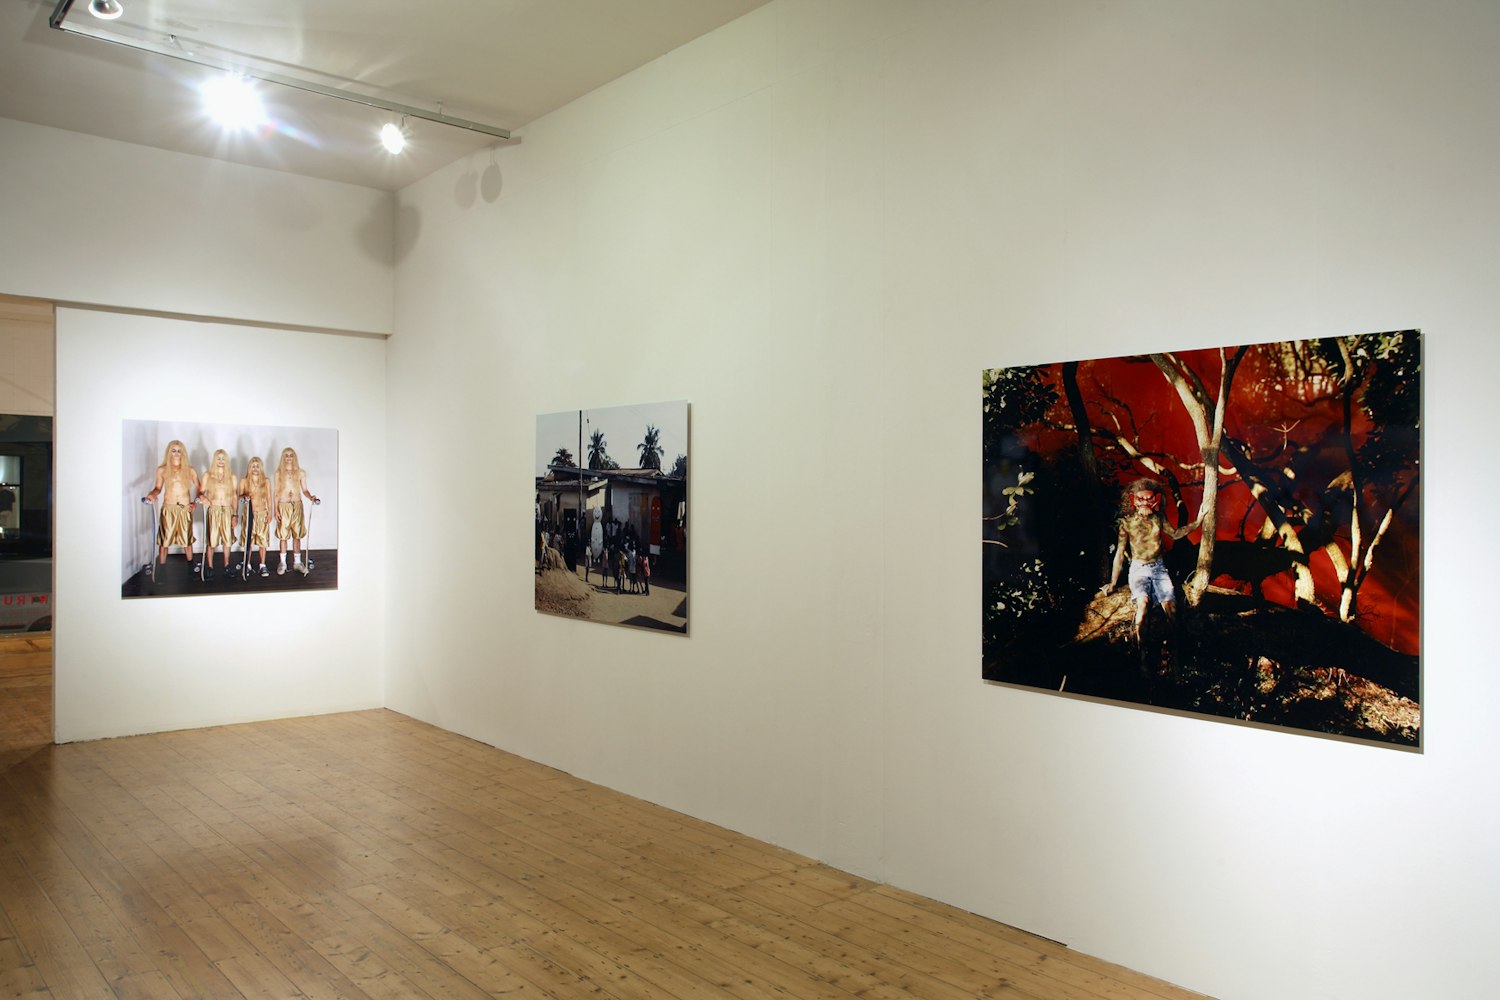 Installation view of Olaf Breuning, 'Home' at 200 Gertrude Street